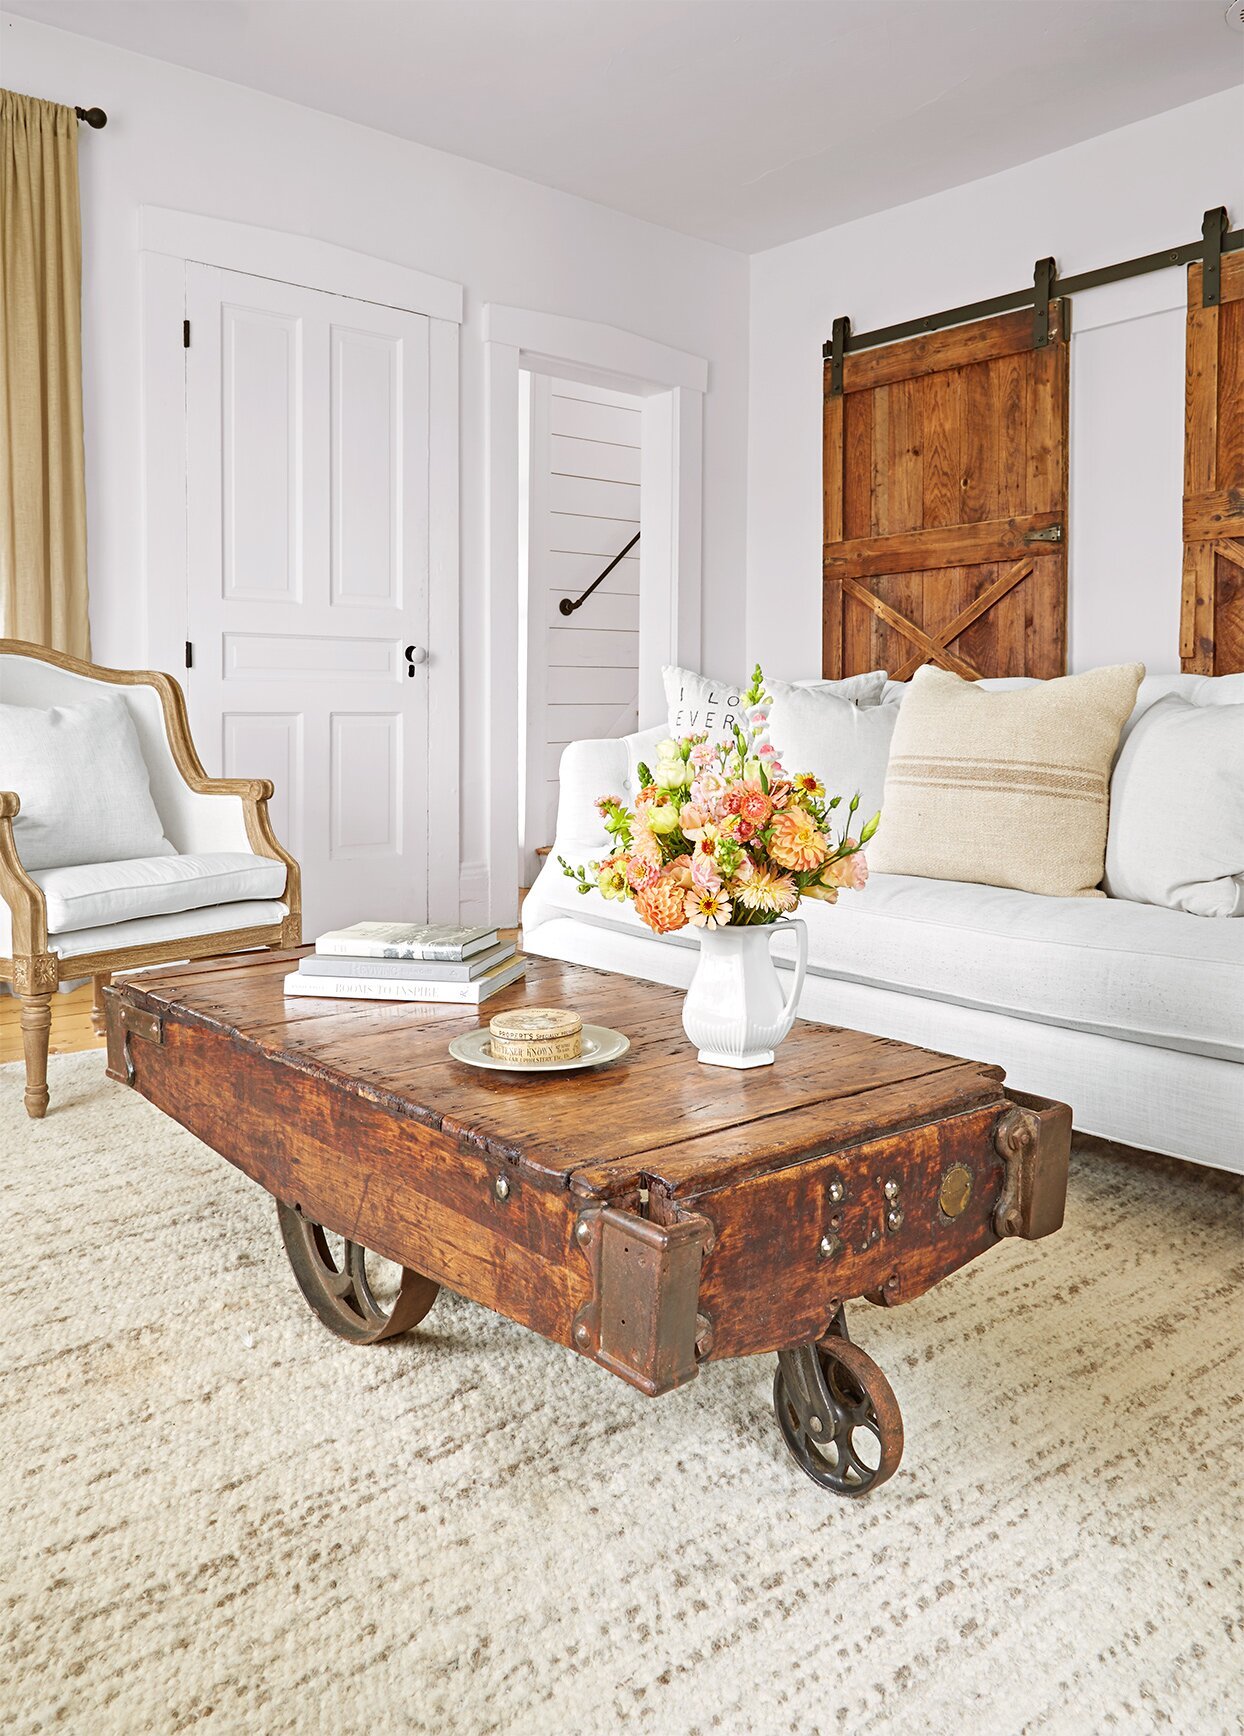 Charming French-Country Decorating Ideas for Every Room